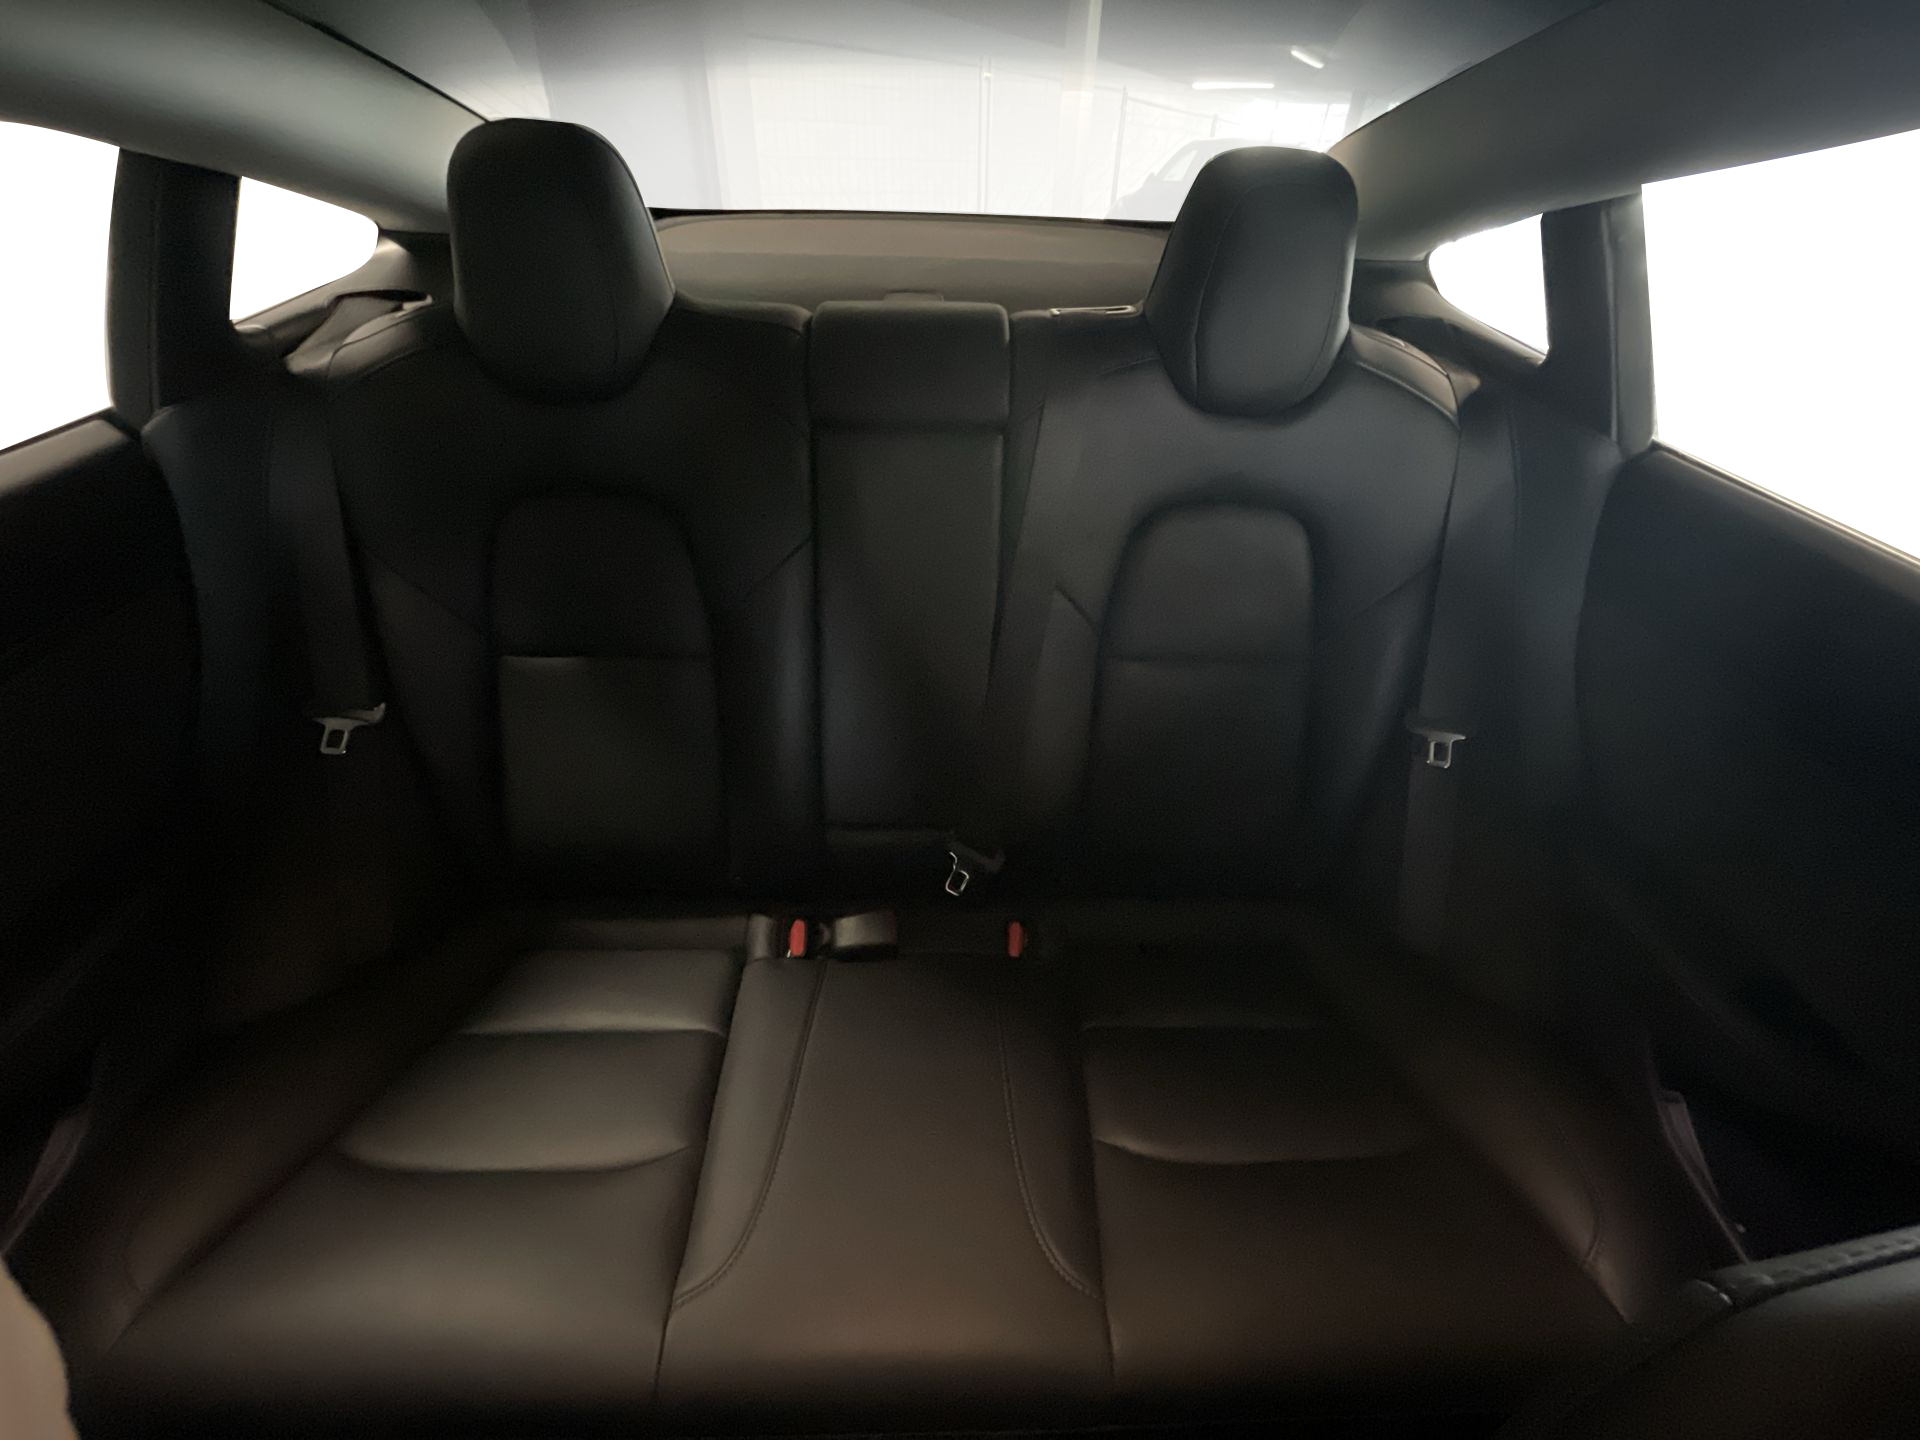 Details for a Rear Interior View From Driver Side